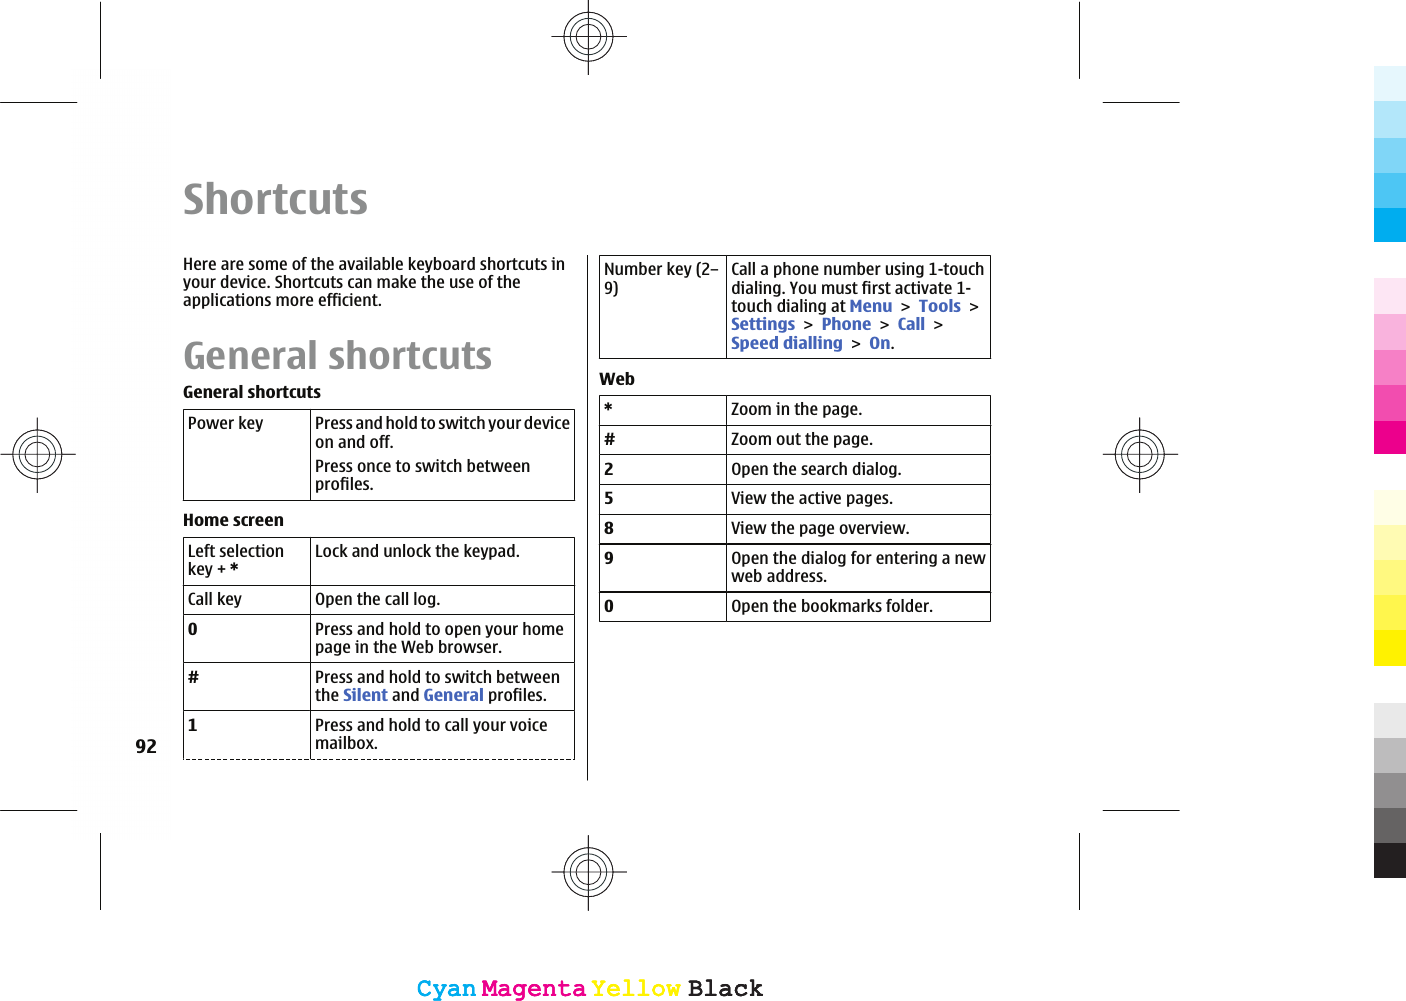 ShortcutsHere are some of the available keyboard shortcuts inyour device. Shortcuts can make the use of theapplications more efficient.General shortcutsGeneral shortcutsPower key Press and hold to switch your deviceon and off.Press once to switch betweenprofiles.Home screenLeft selectionkey + *Lock and unlock the keypad.Call key Open the call log.0Press and hold to open your homepage in the Web browser.#Press and hold to switch betweenthe Silent and General profiles.1Press and hold to call your voicemailbox.Number key (2–9)Call a phone number using 1-touchdialing. You must first activate 1-touch dialing at MenuToolsSettingsPhoneCallSpeed diallingOn.Web*Zoom in the page.#Zoom out the page.2Open the search dialog.5View the active pages.8View the page overview.9Open the dialog for entering a newweb address.0Open the bookmarks folder.92CyanCyanMagentaMagentaYellowYellowBlackBlackCyanCyanMagentaMagentaYellowYellowBlackBlack